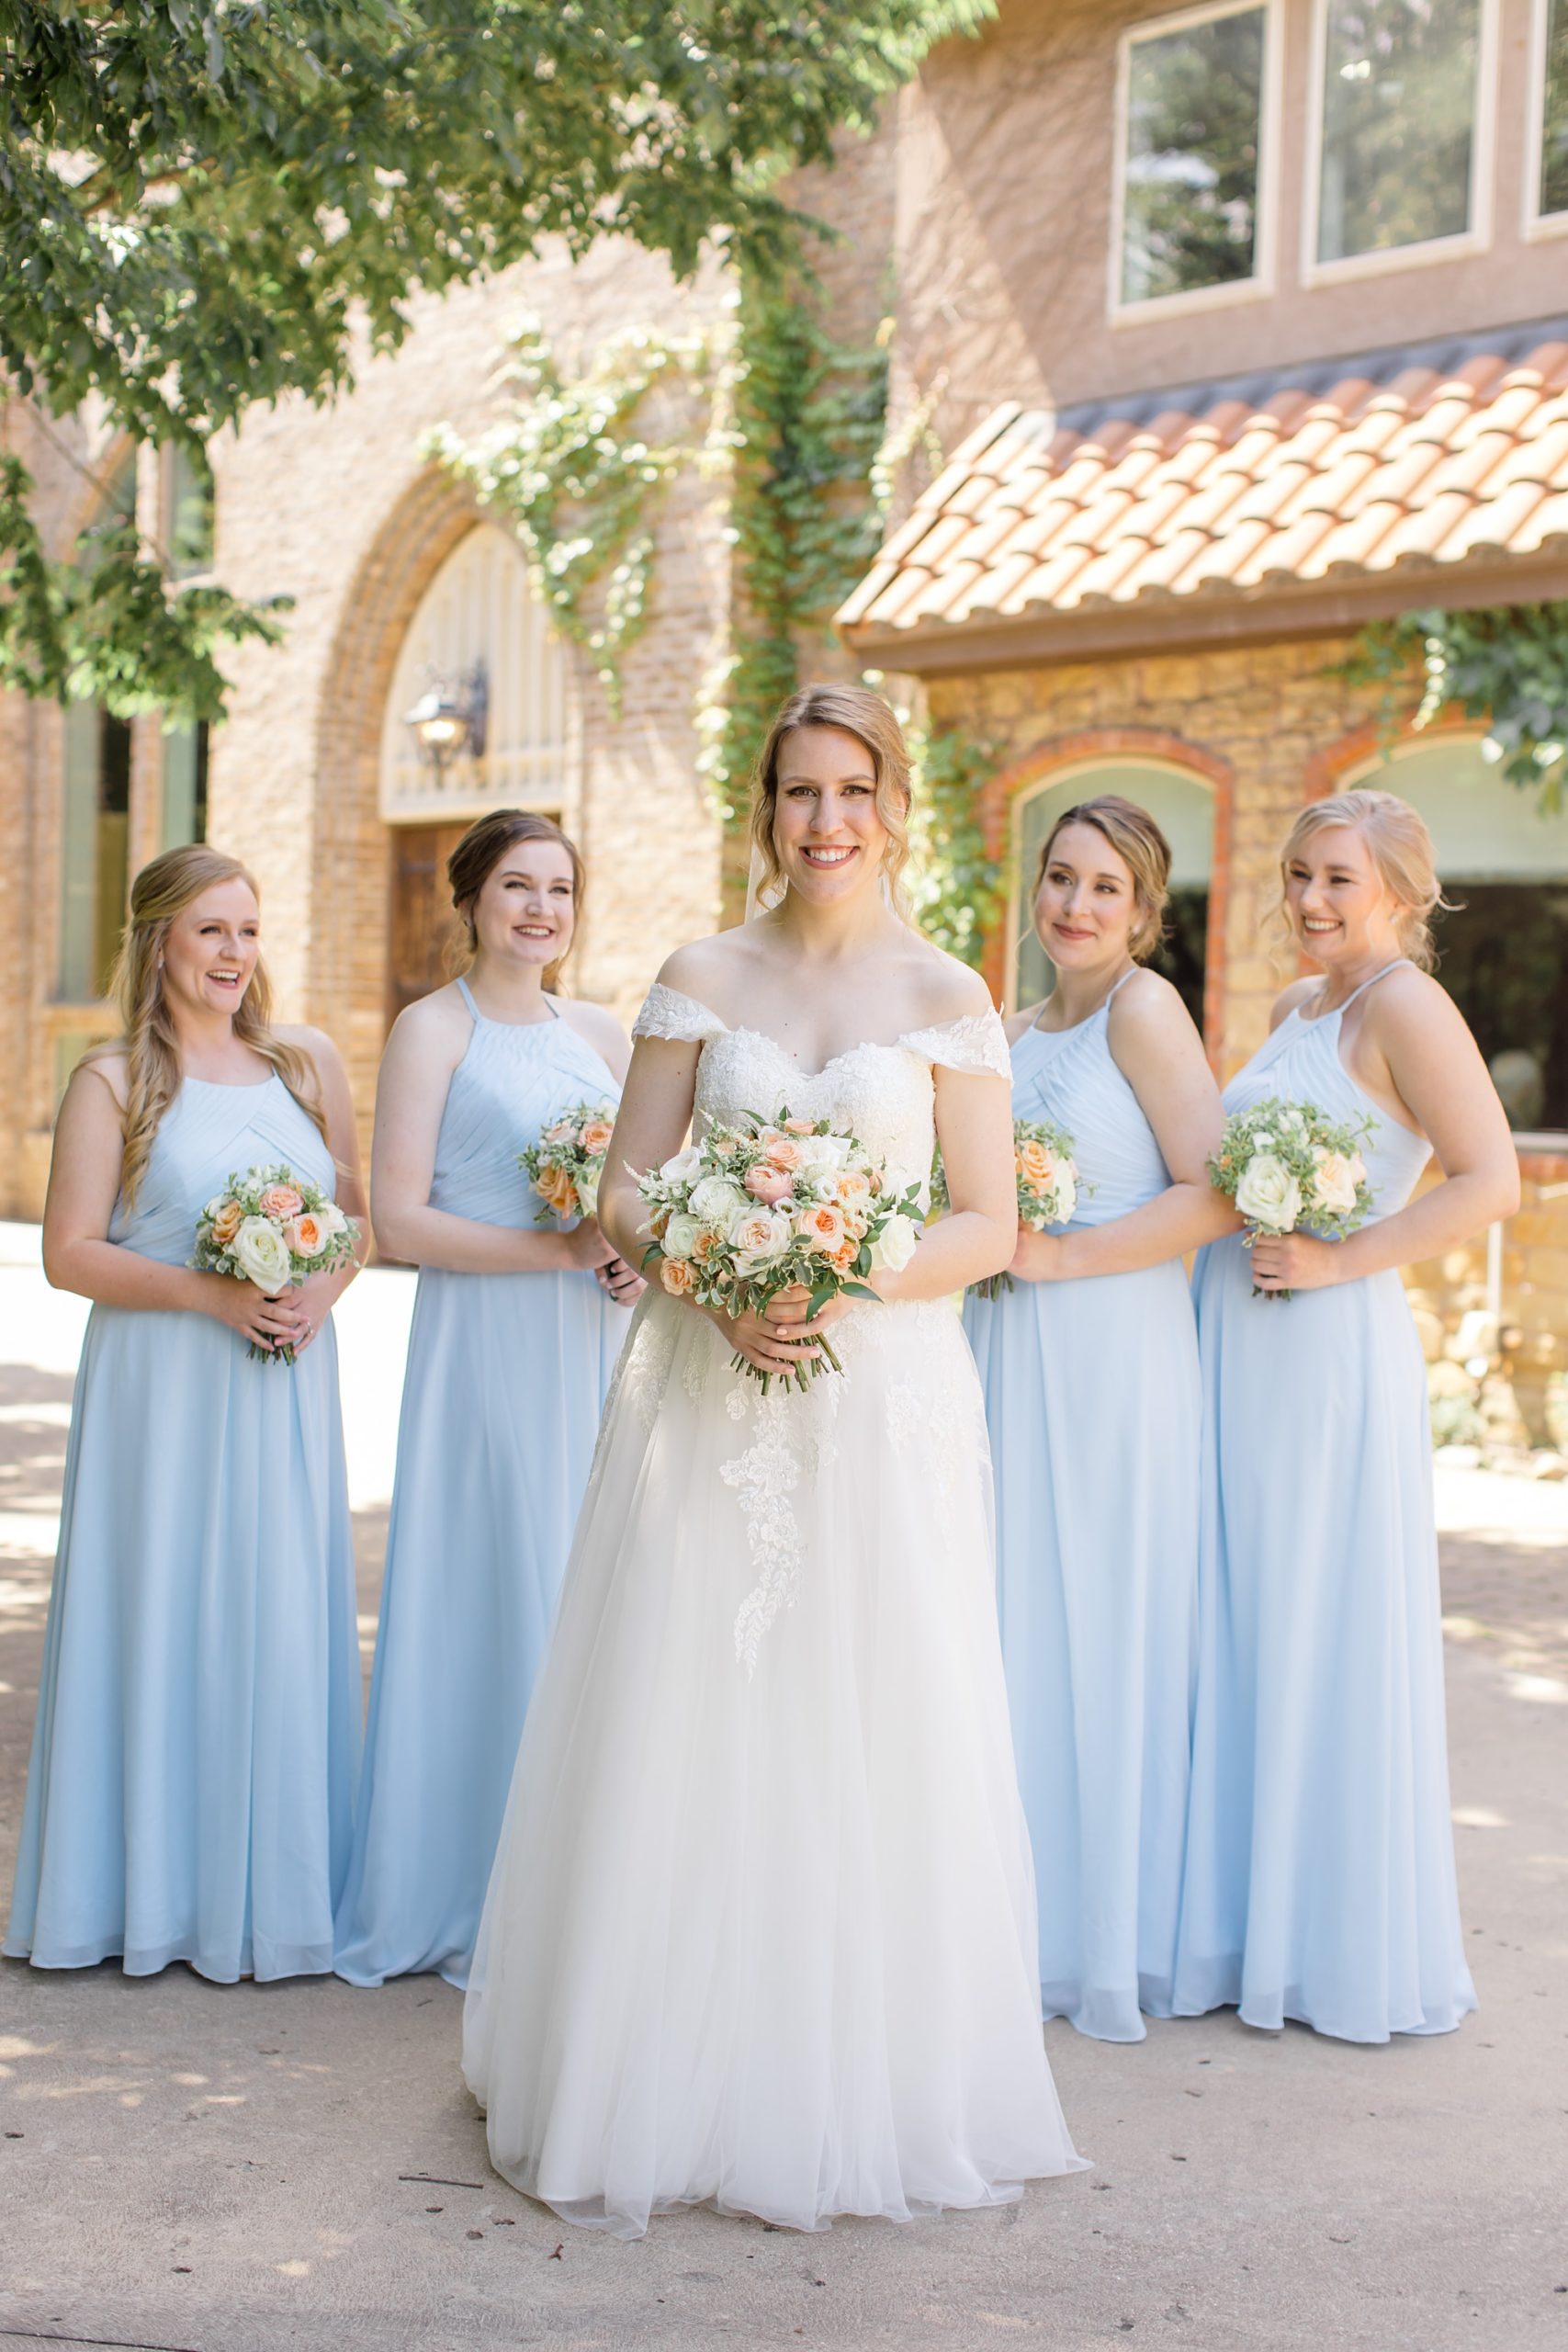 bride stands in front of bridesmaids in pale blue gowns